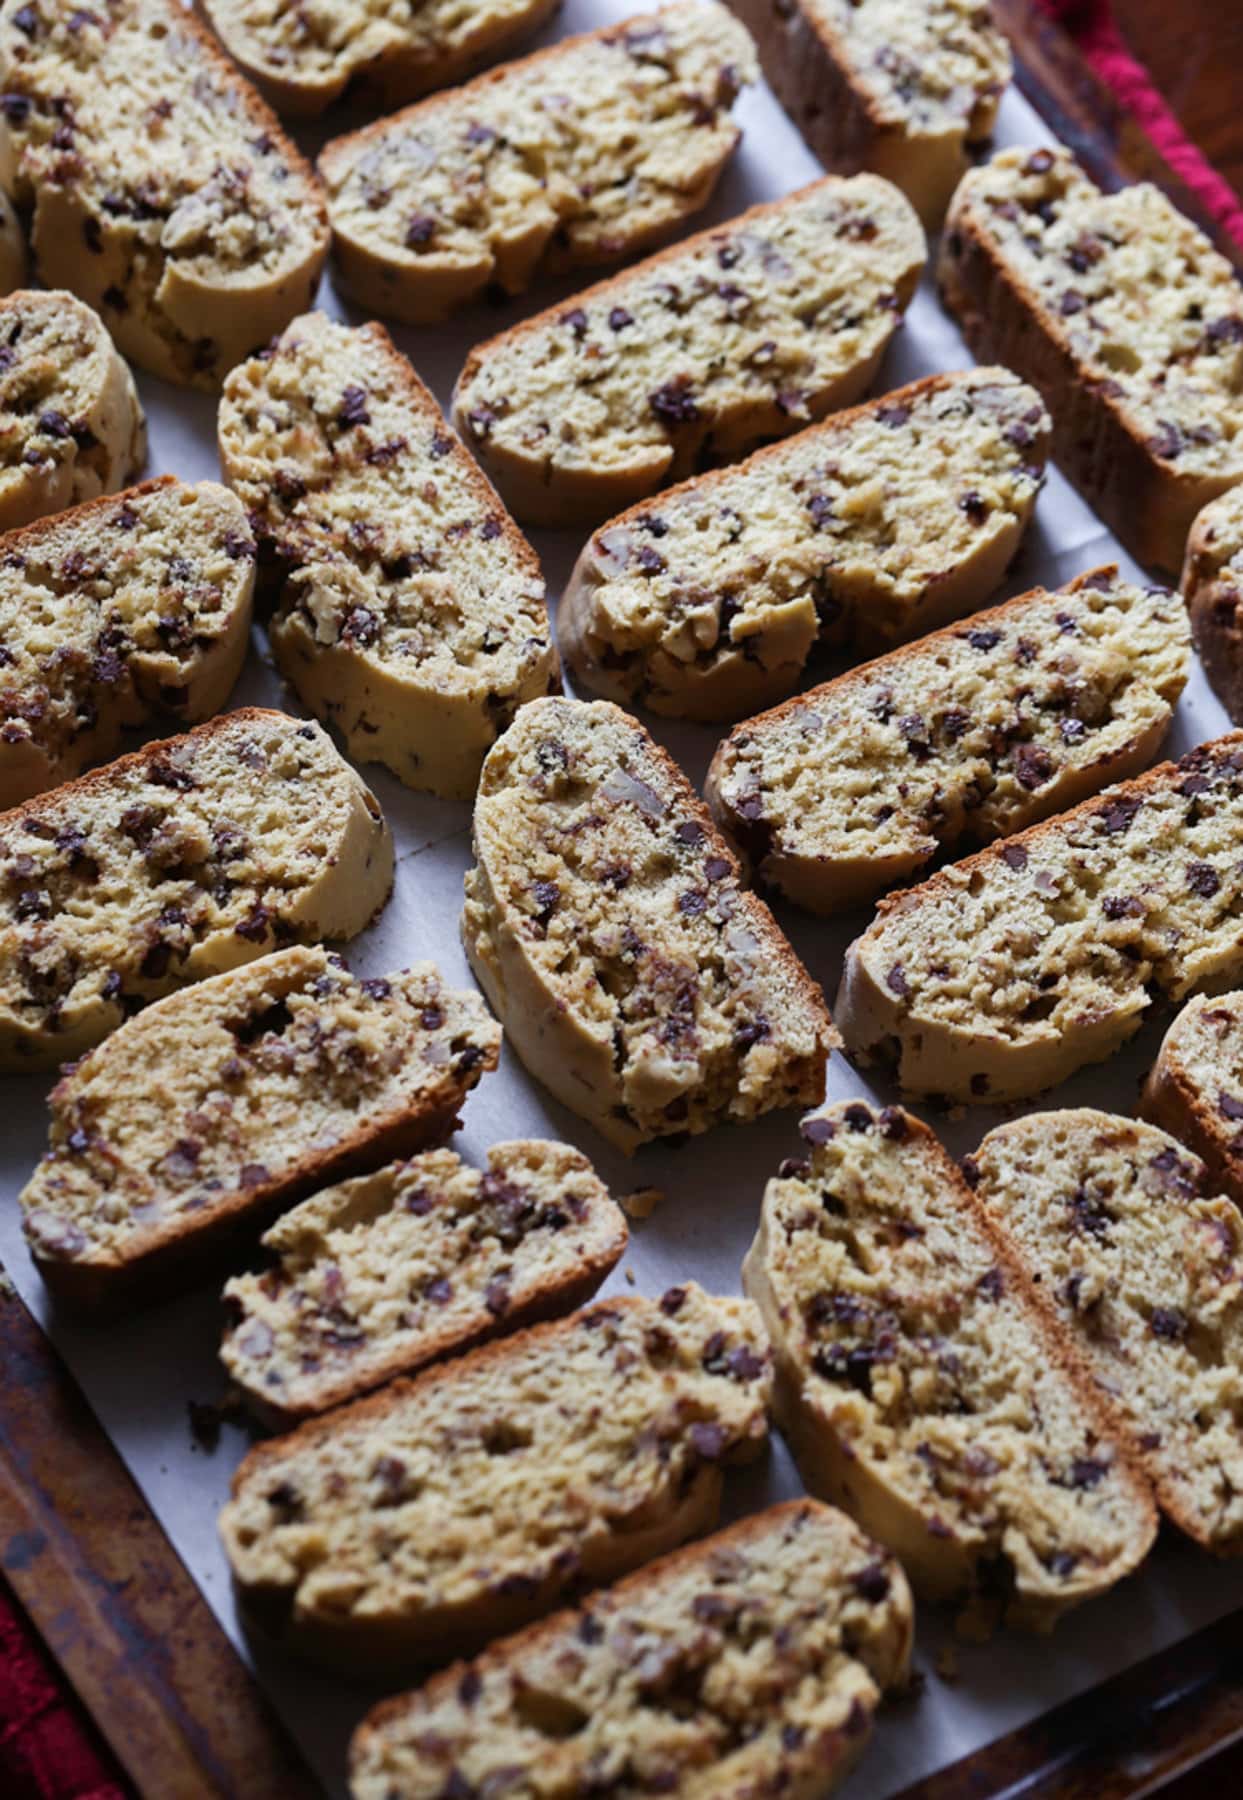 Baked biscotti on a baking sheet lined with parchment paper